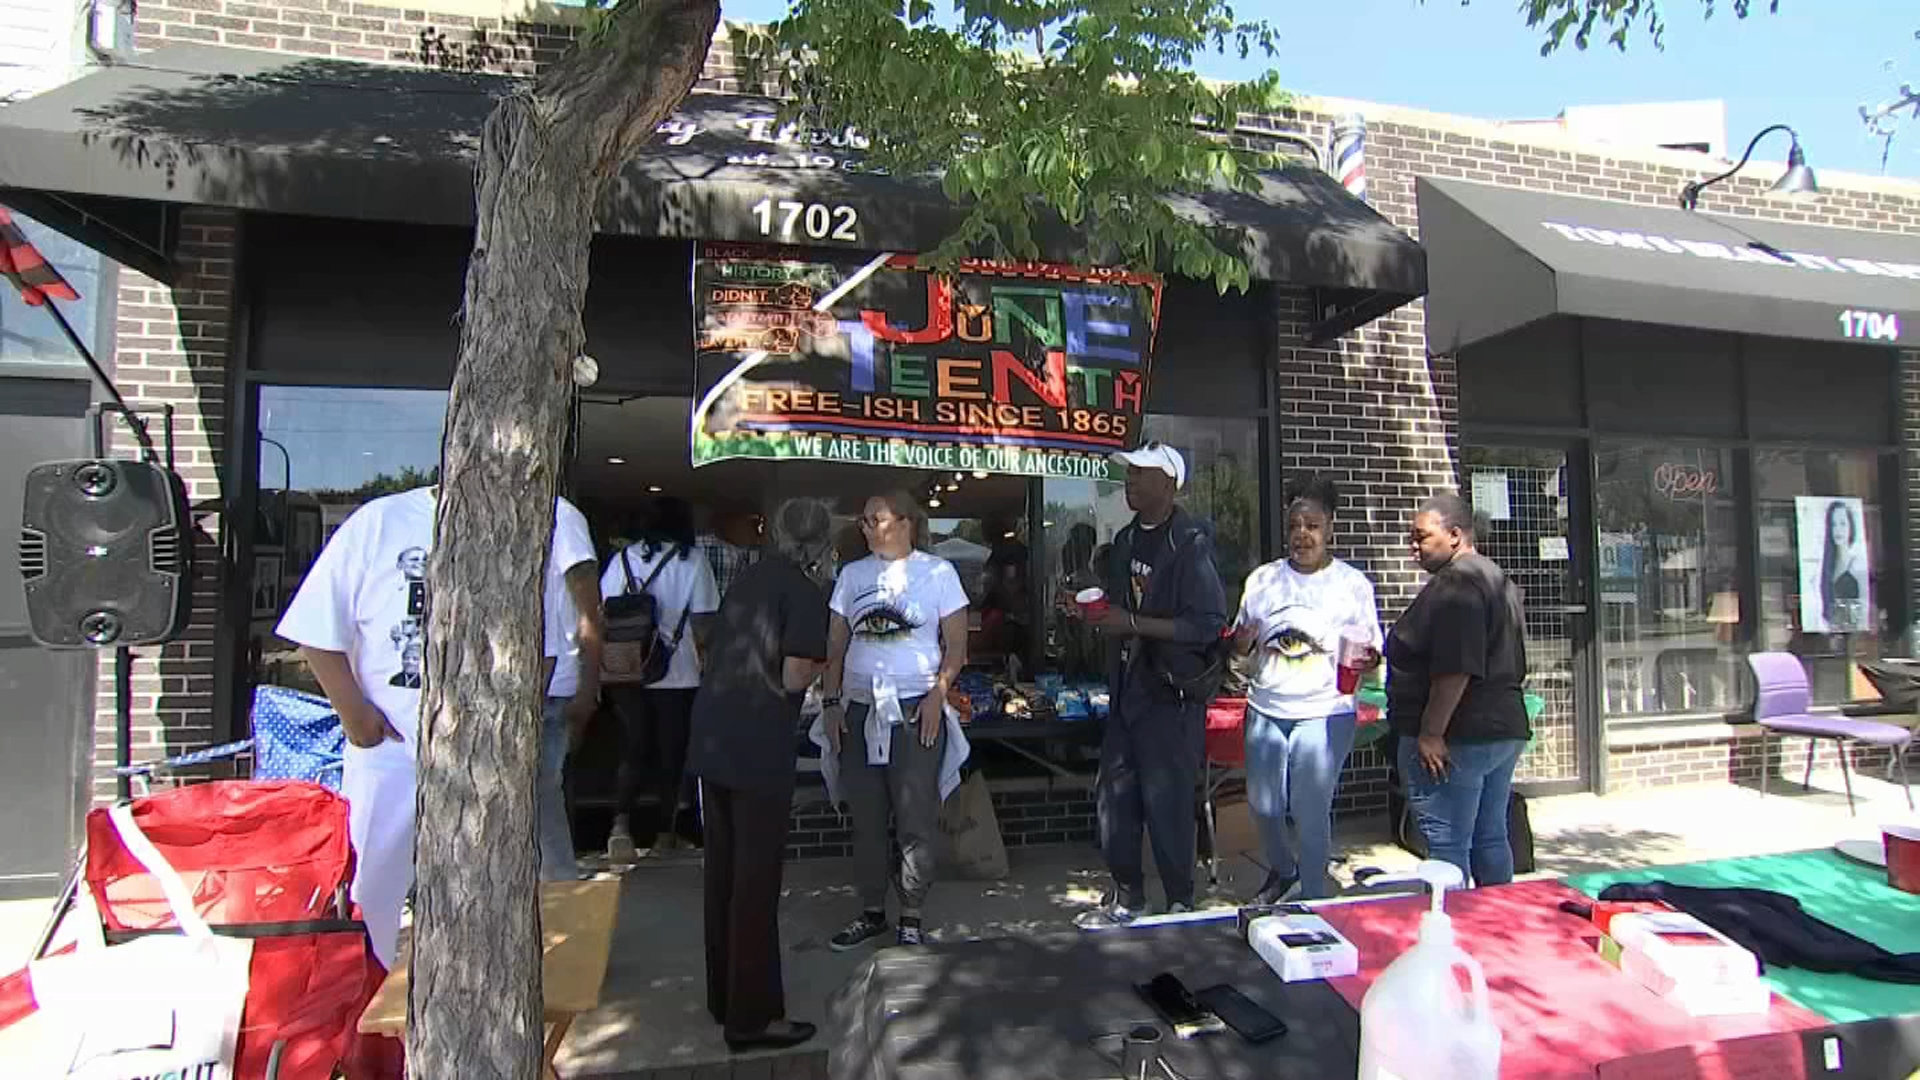 Chicago-Area Residents Mark Juneteenth With Celebrations and Service Projects – NBC Chicago